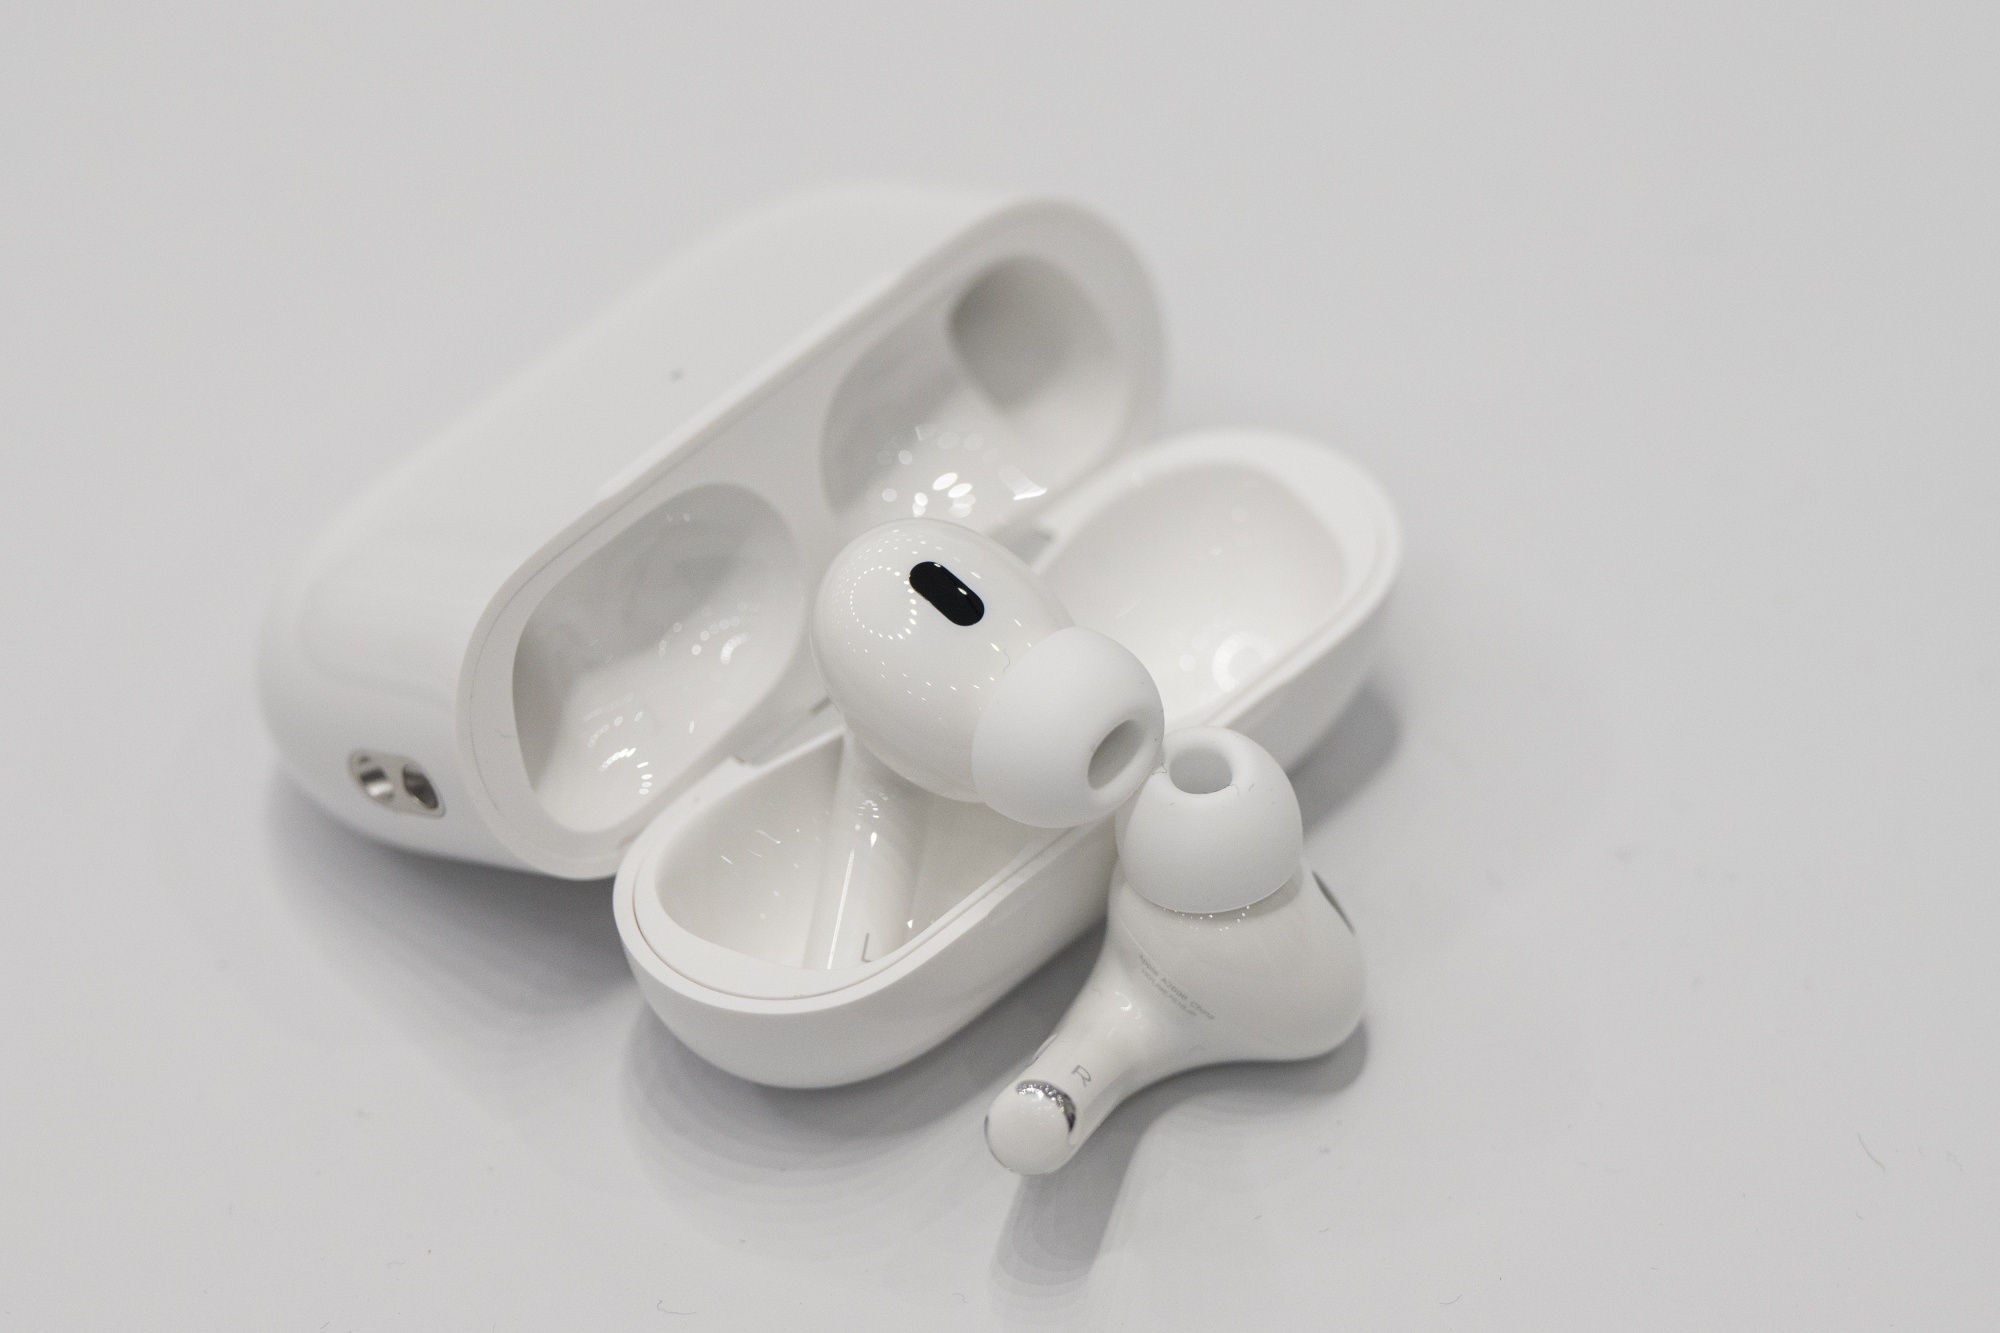 Apple AirPods Plans: Hearing Test, Body Temperature, Cheaper